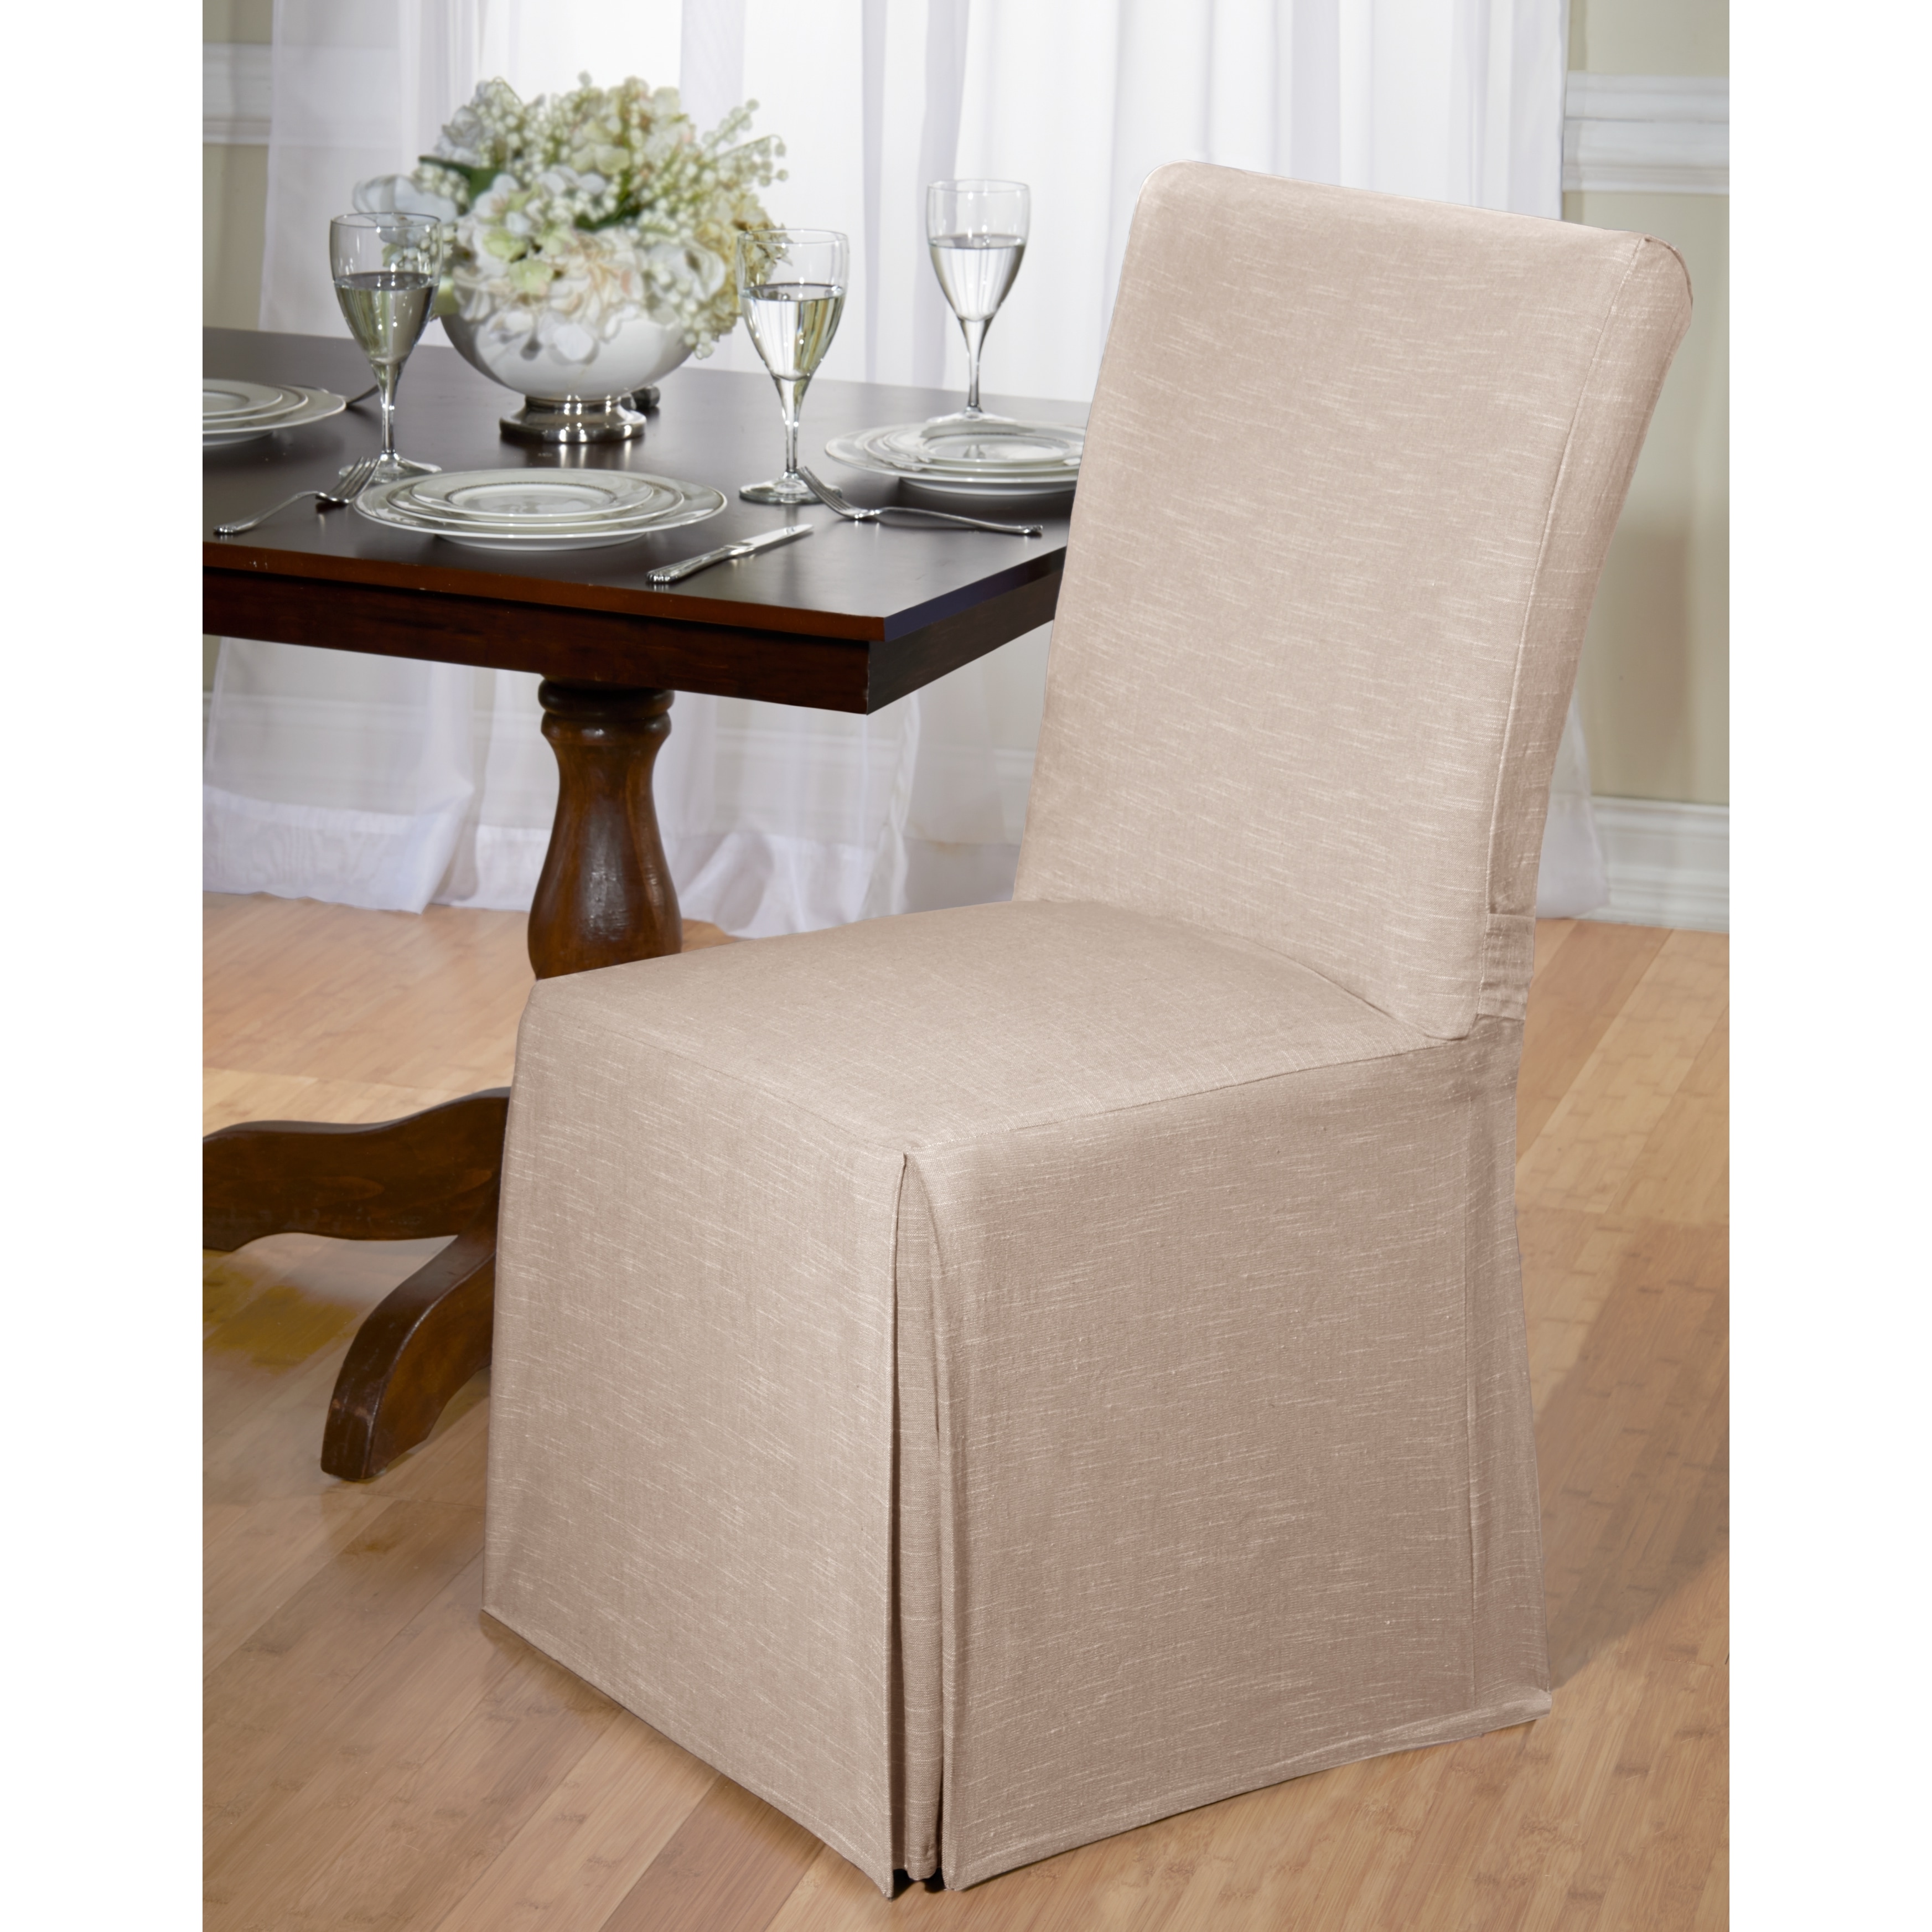 dining chair covers to buy